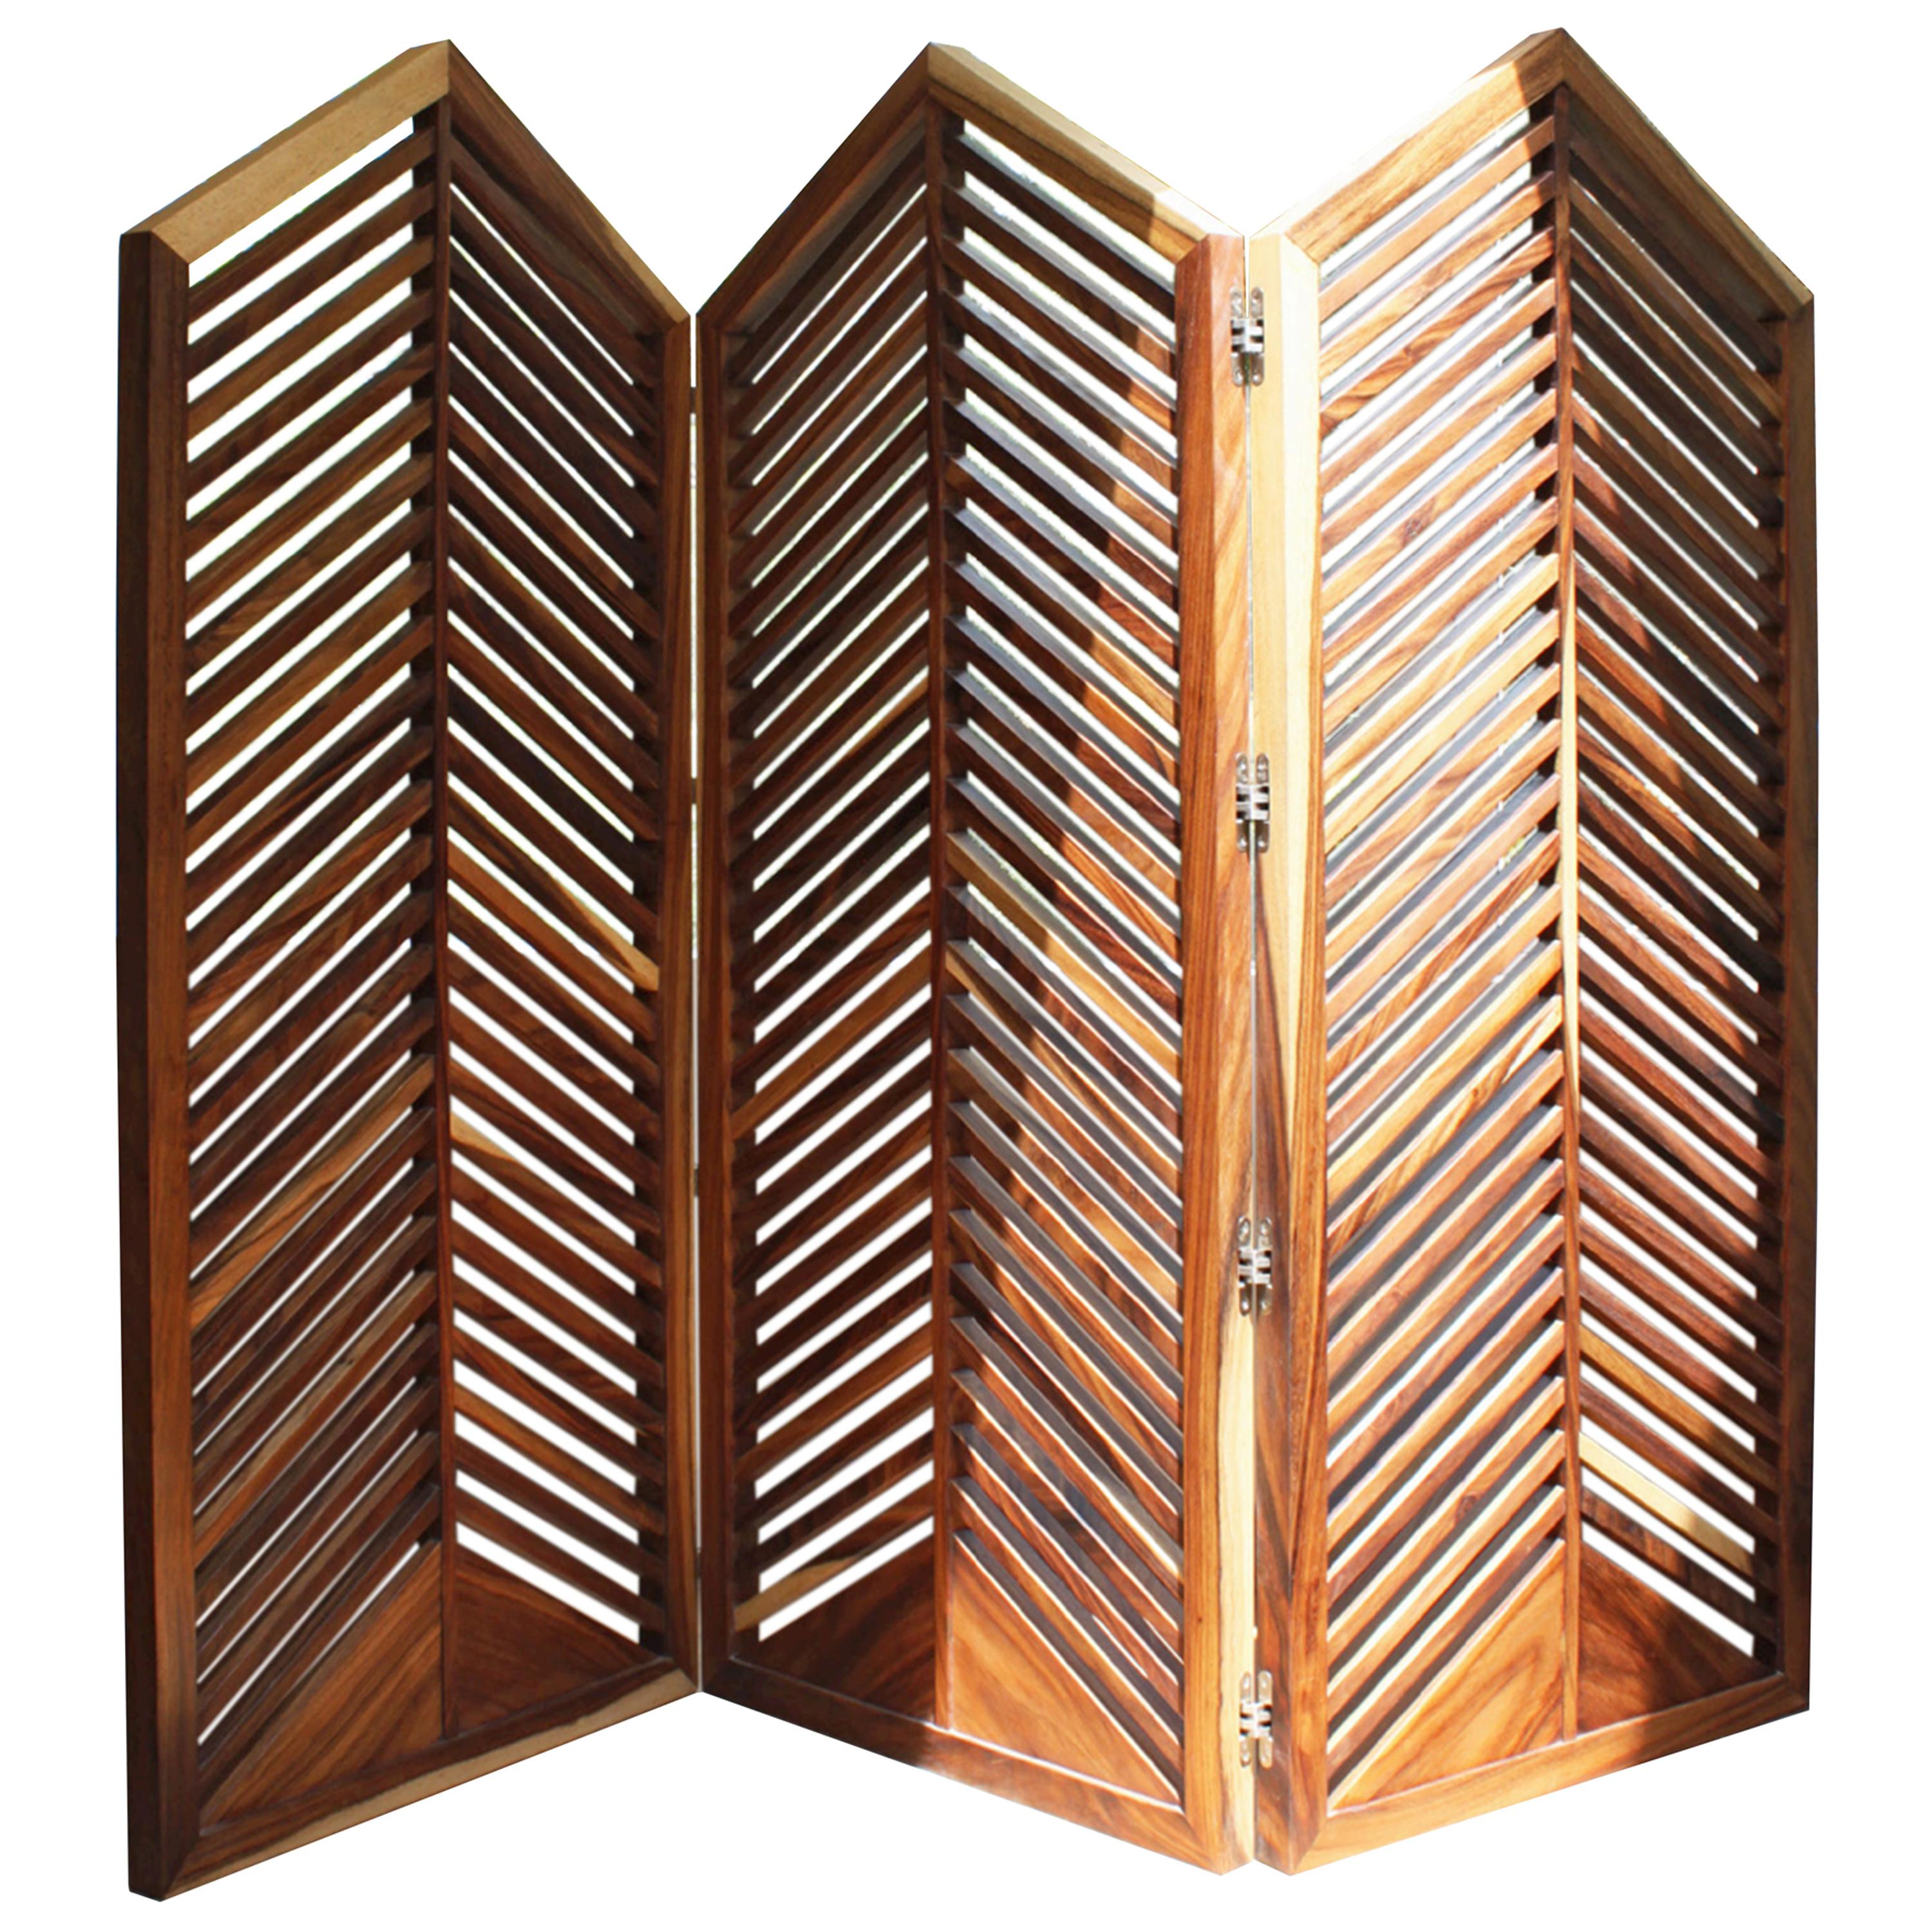 Biombo Room Divider by Maria Beckmann, Represented by Tuleste Factory For Sale